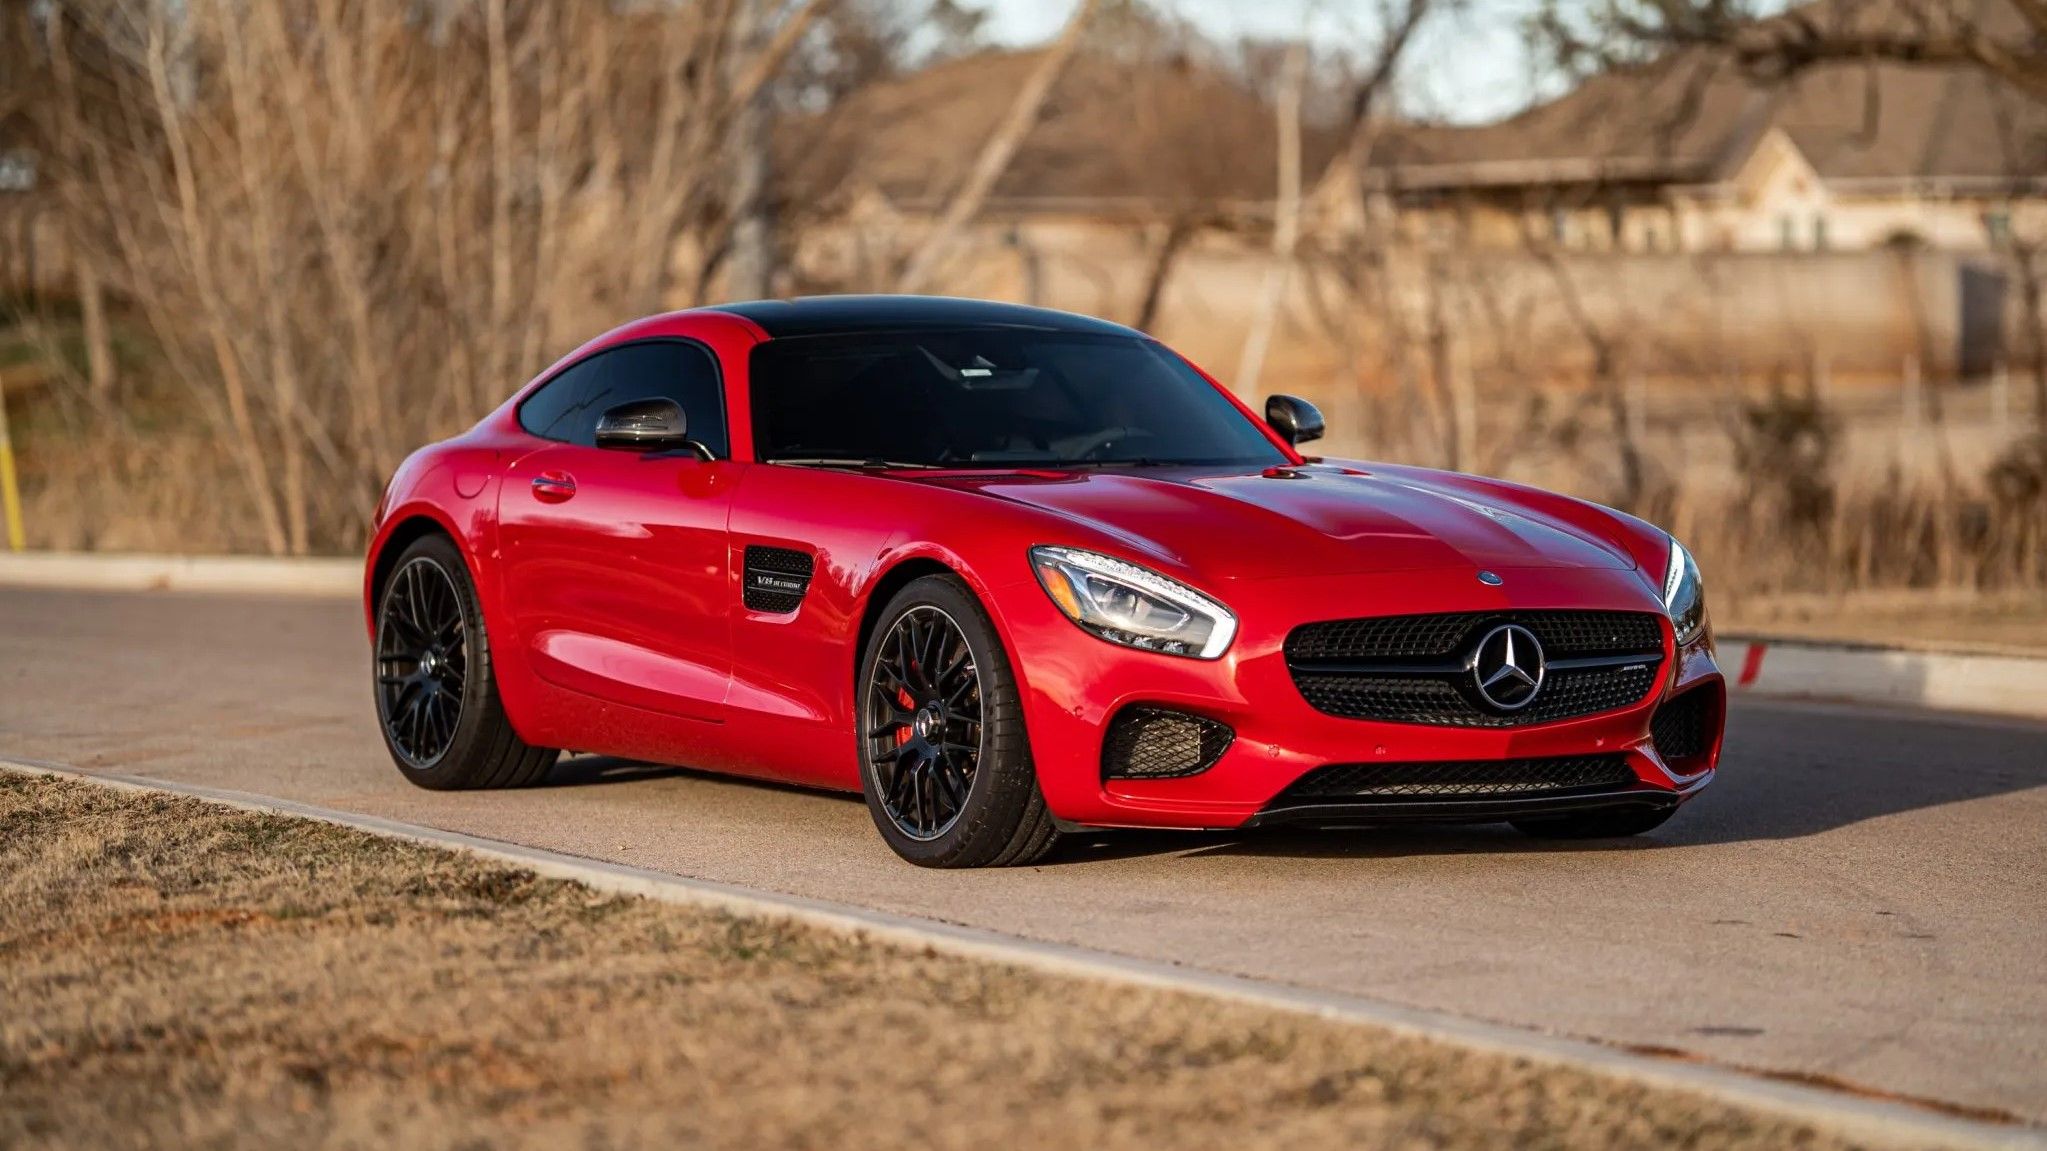 Top 10 Dream Cars You Can Buy For $100,000 Or Less